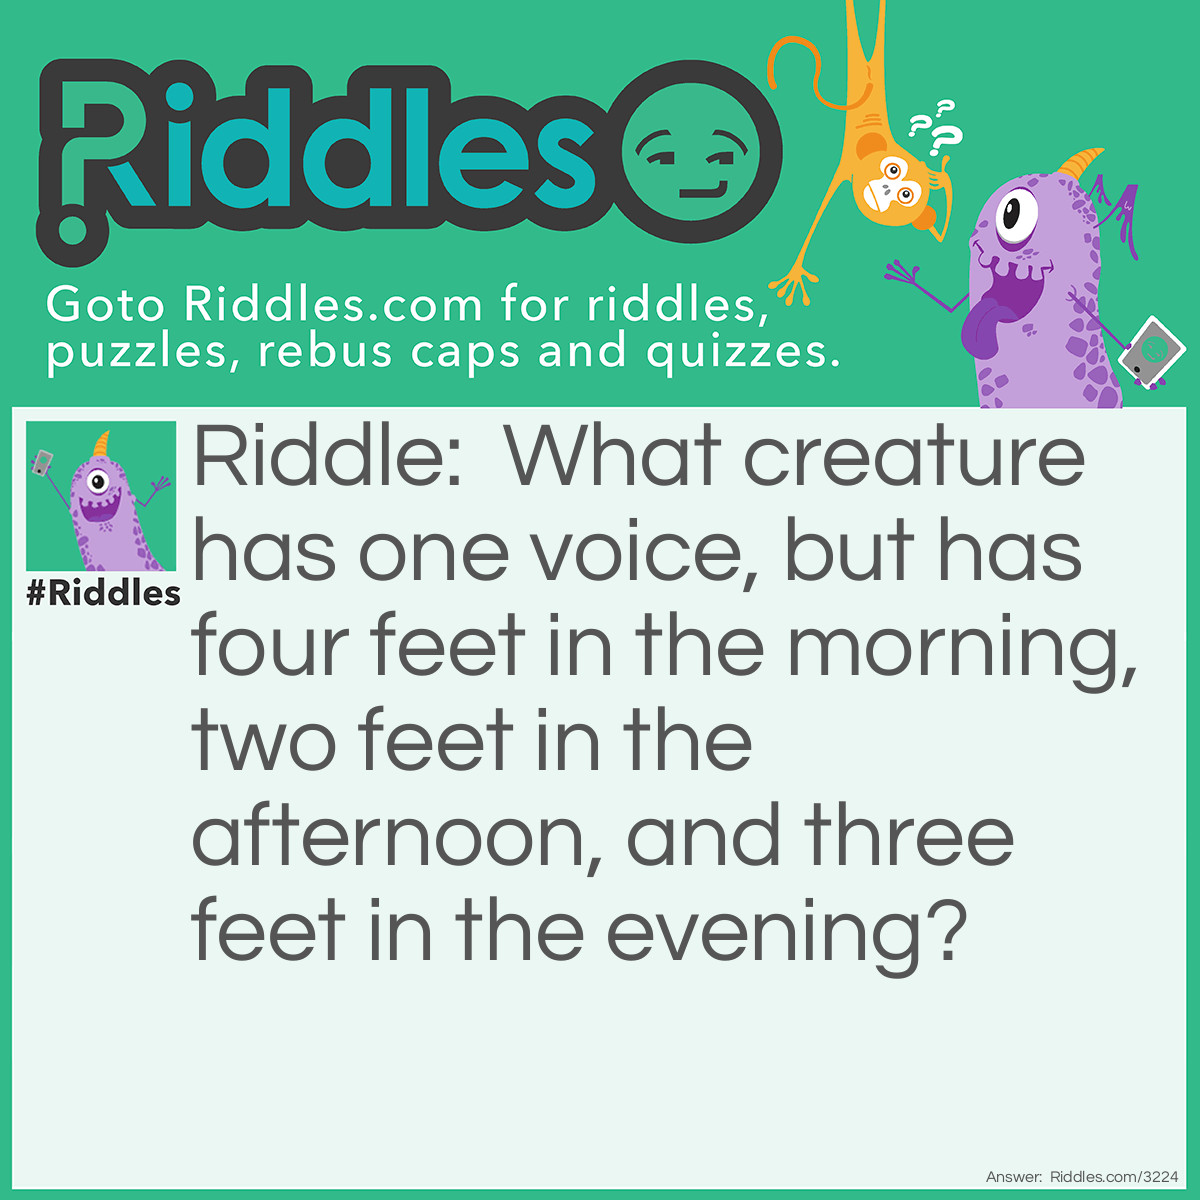 Riddle: What creature has one voice, but has four feet in the morning, two feet in the afternoon, and three feet in the evening? Answer: Man crawls on all fours as a baby, walks on two as an adult, and needs a walking cane when old.  The Sphinx posed this riddle to Oedipus who solved the riddle correctly.